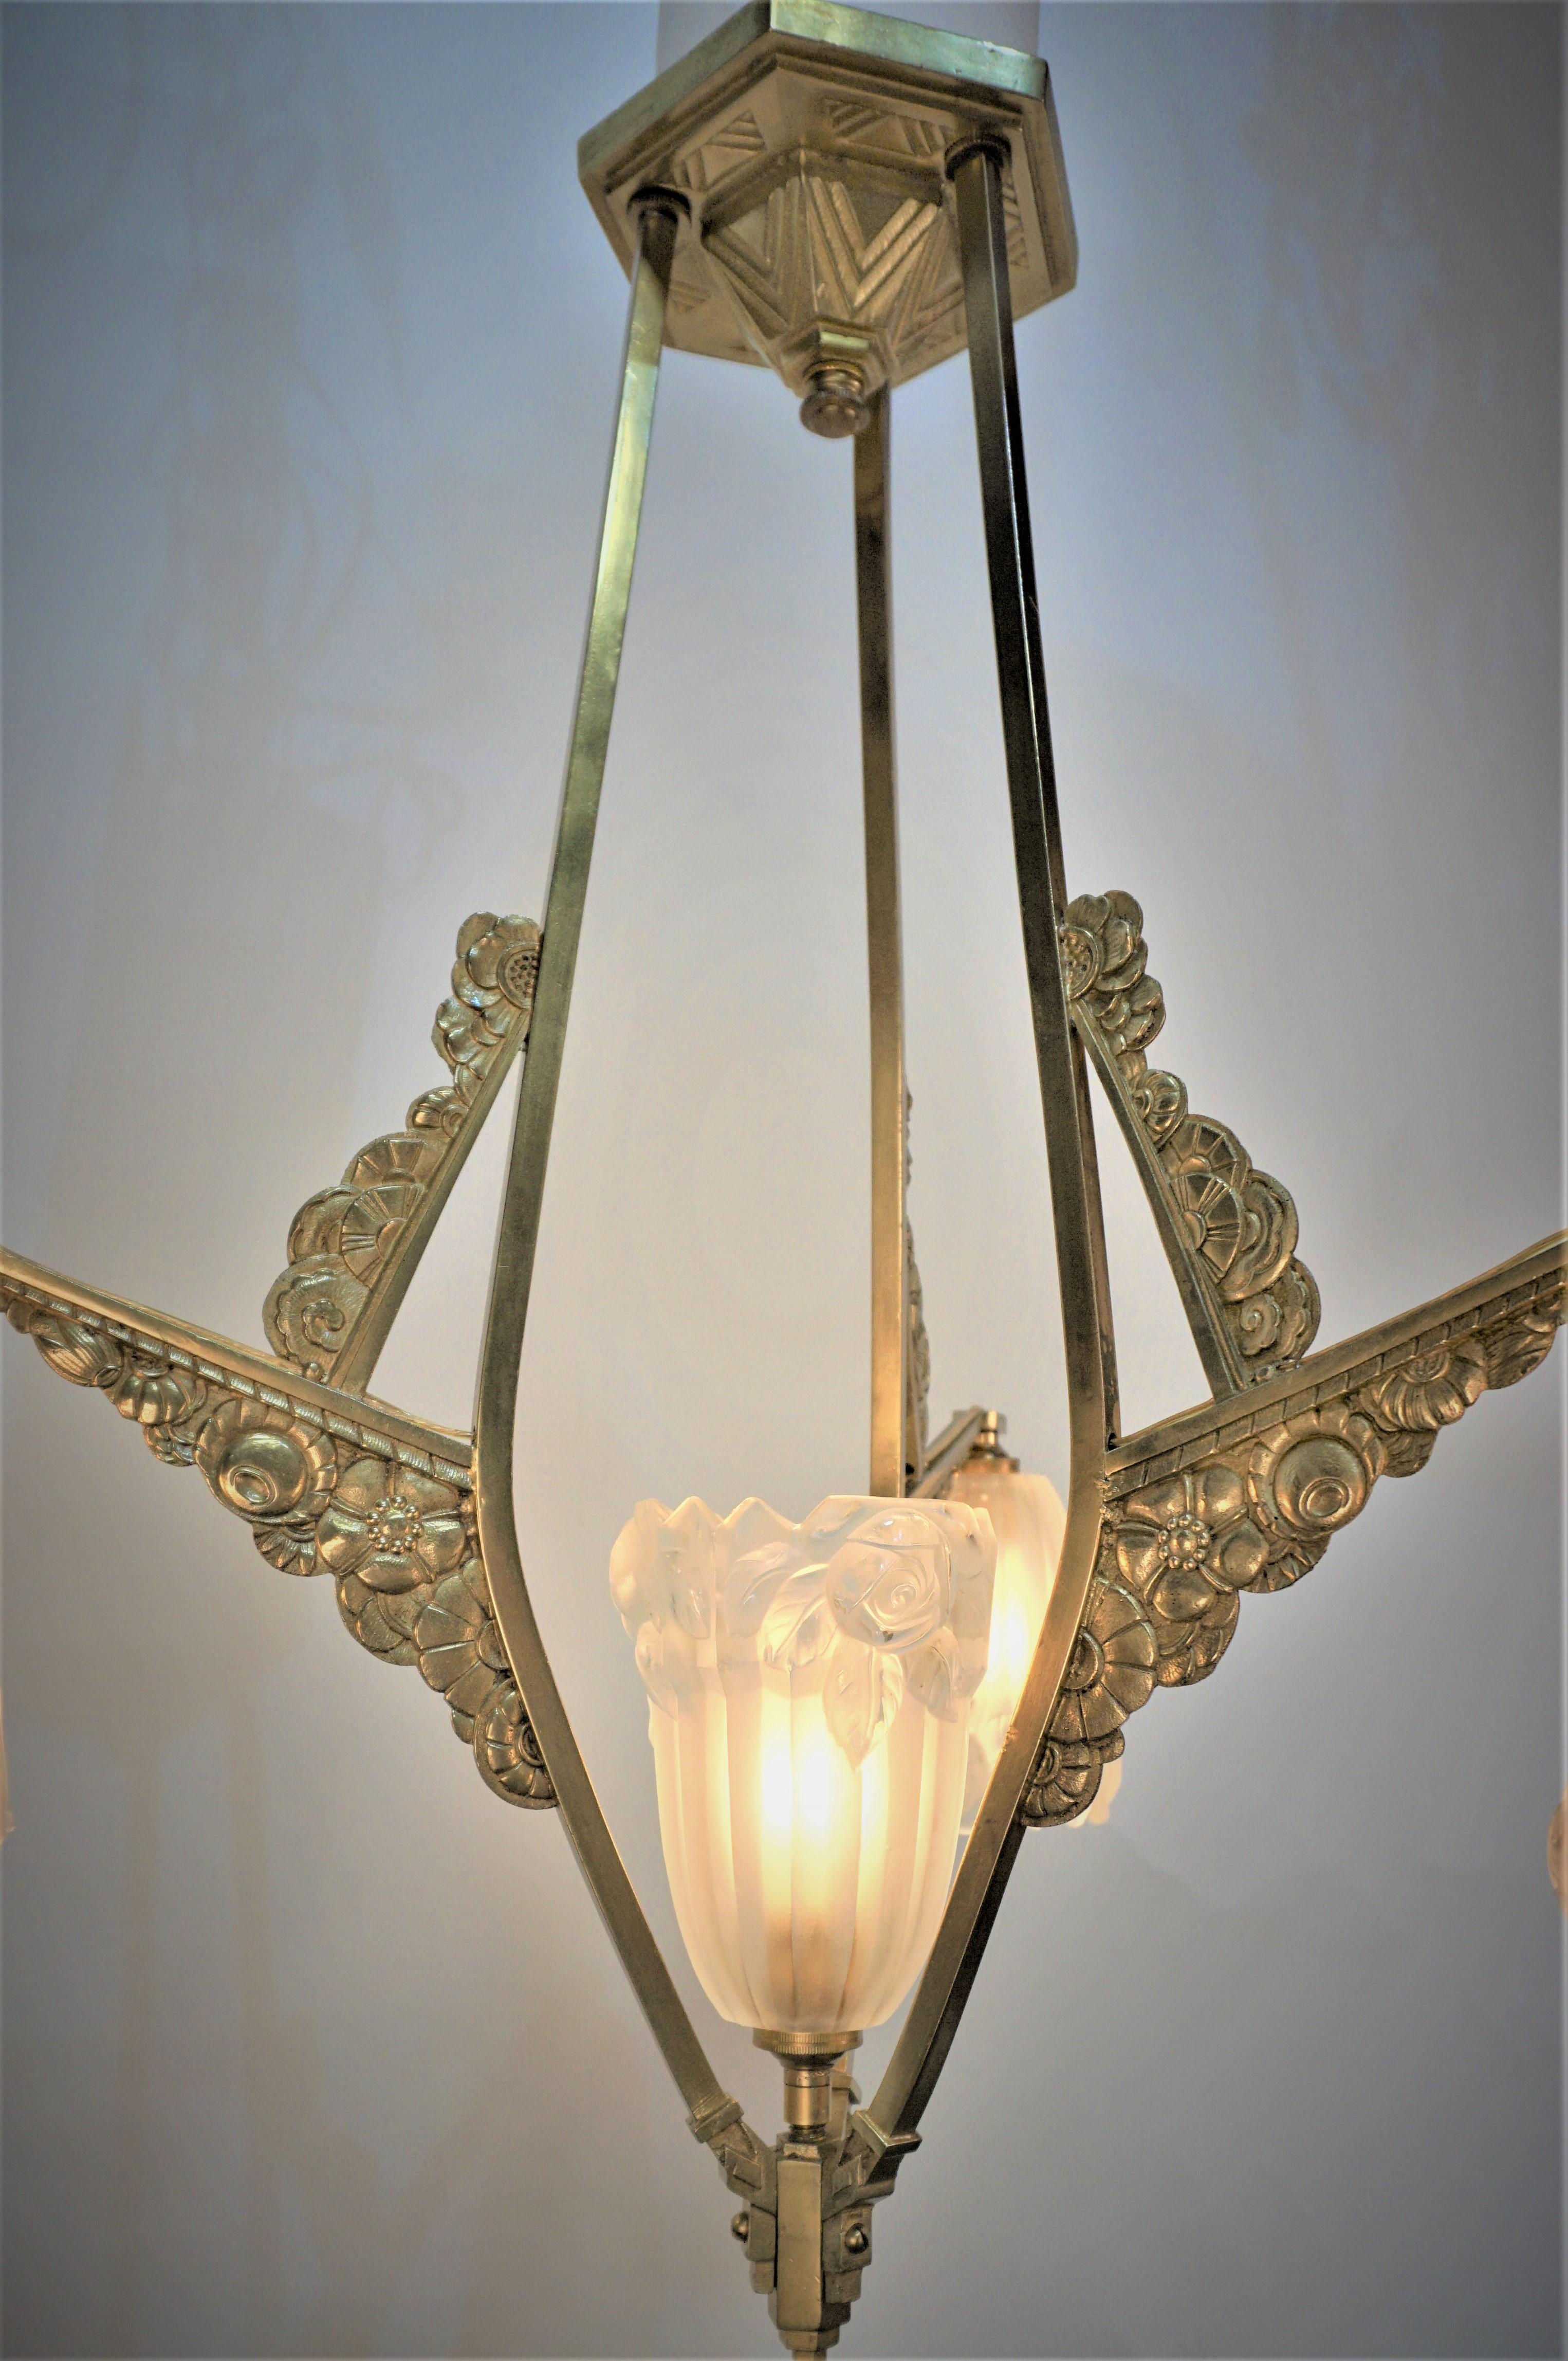 Beautiful bronze Art deco chandelier with four clear frost glass shades by J. Robert.
Professionally rewired and ready for installation.